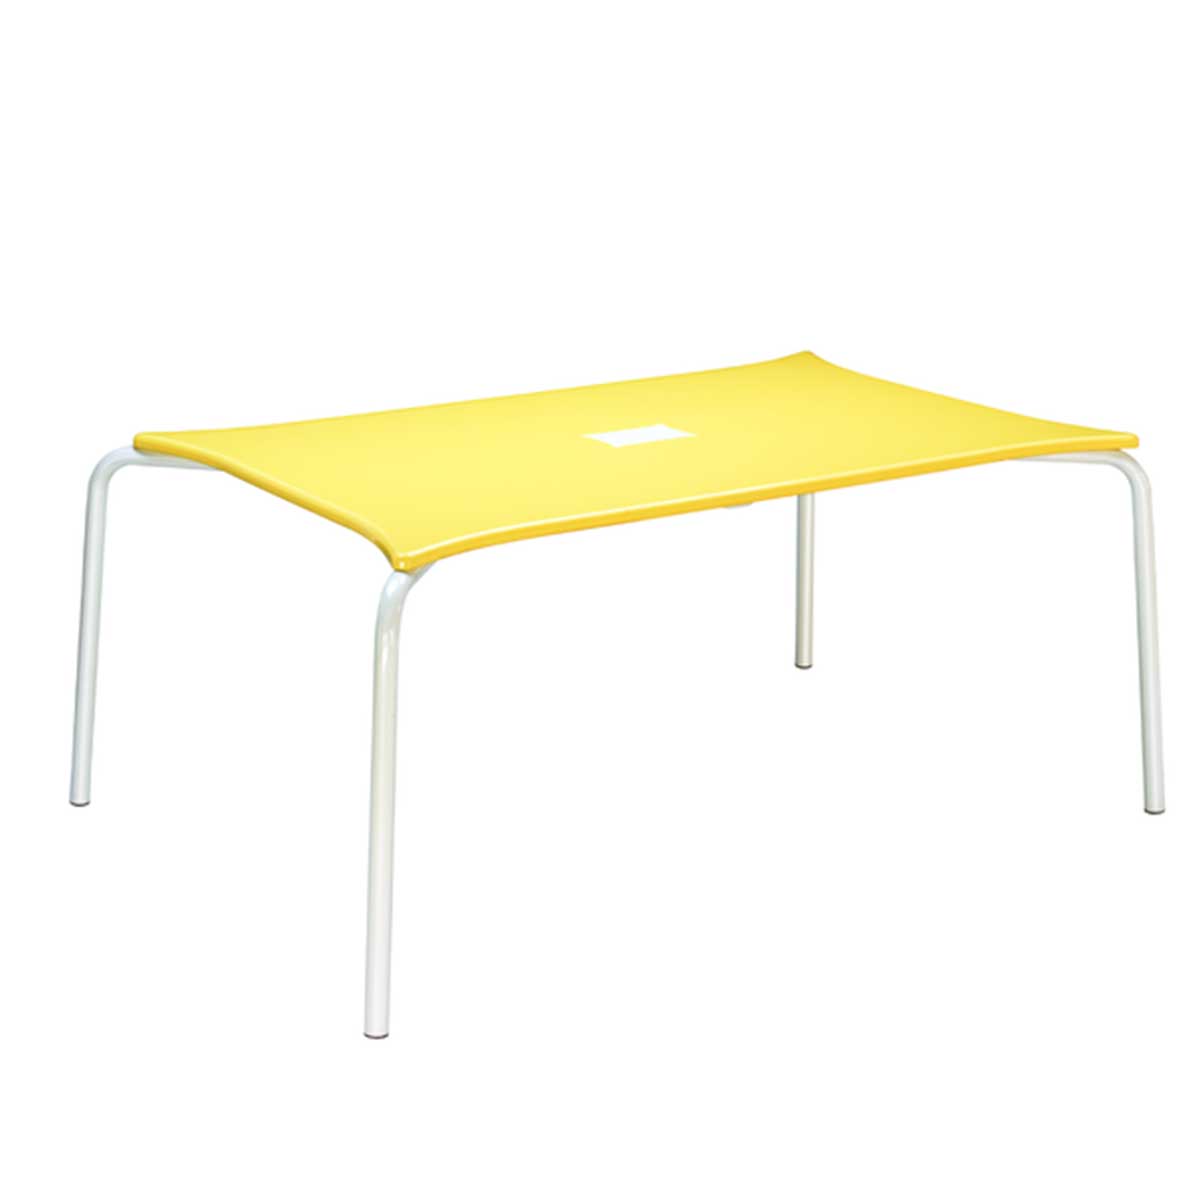 Cafeteria Table Manufacturers, Suppliers in Mohan Nagar